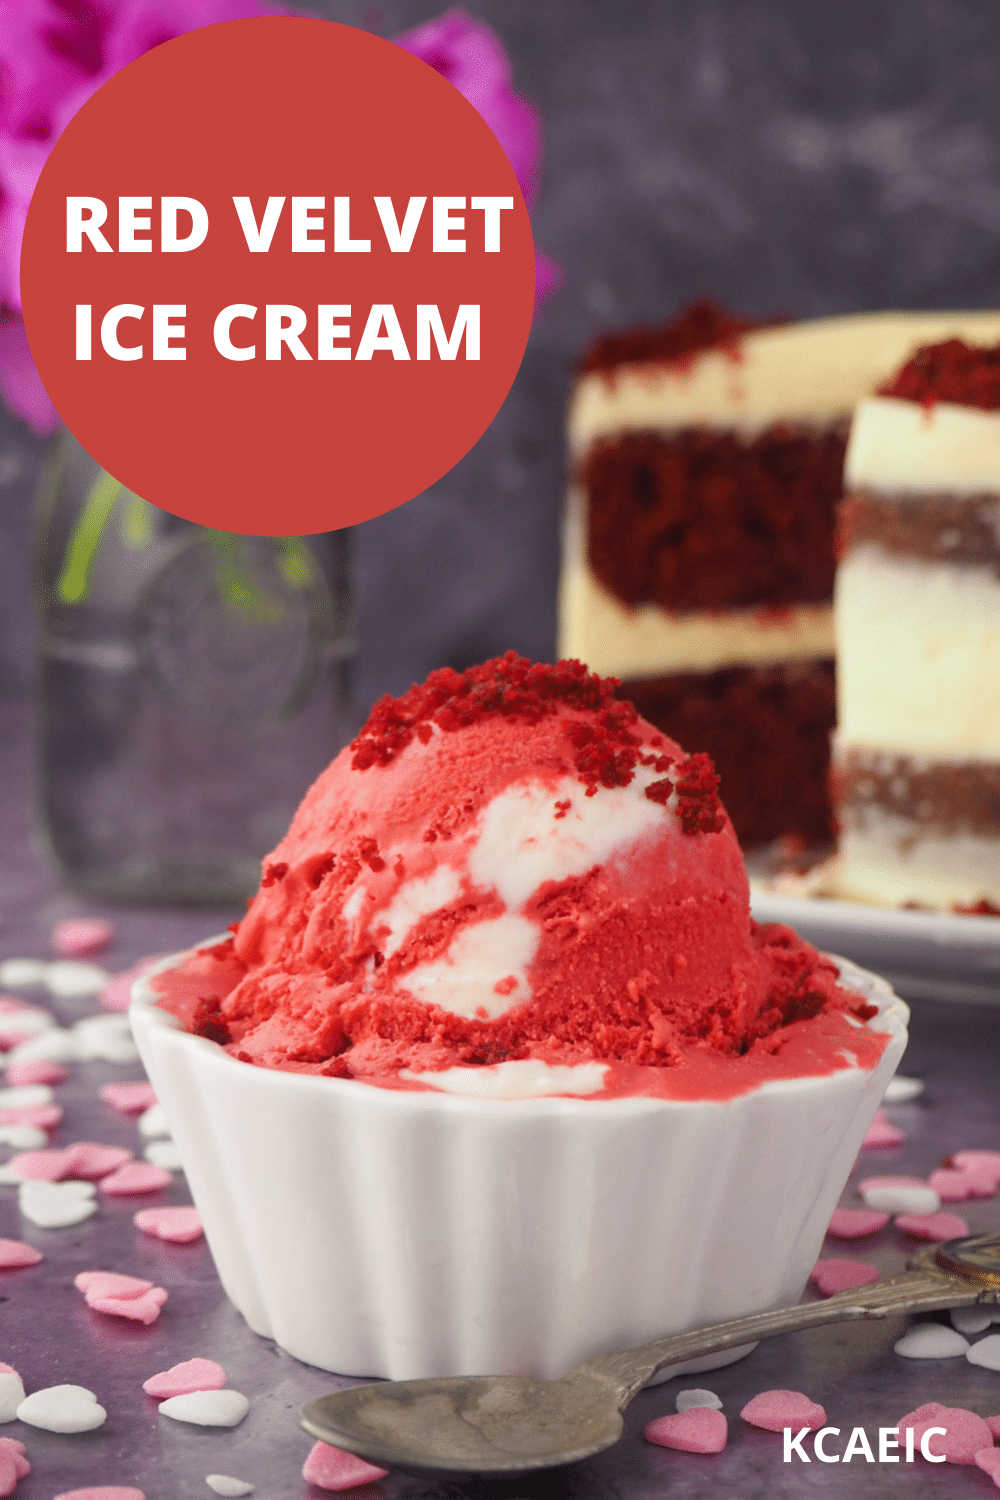 Red velvet ice cream with spoon, and red velvet cake and pink flowers in the background, with text overlay, red velvet ice cream and KCAEIC.